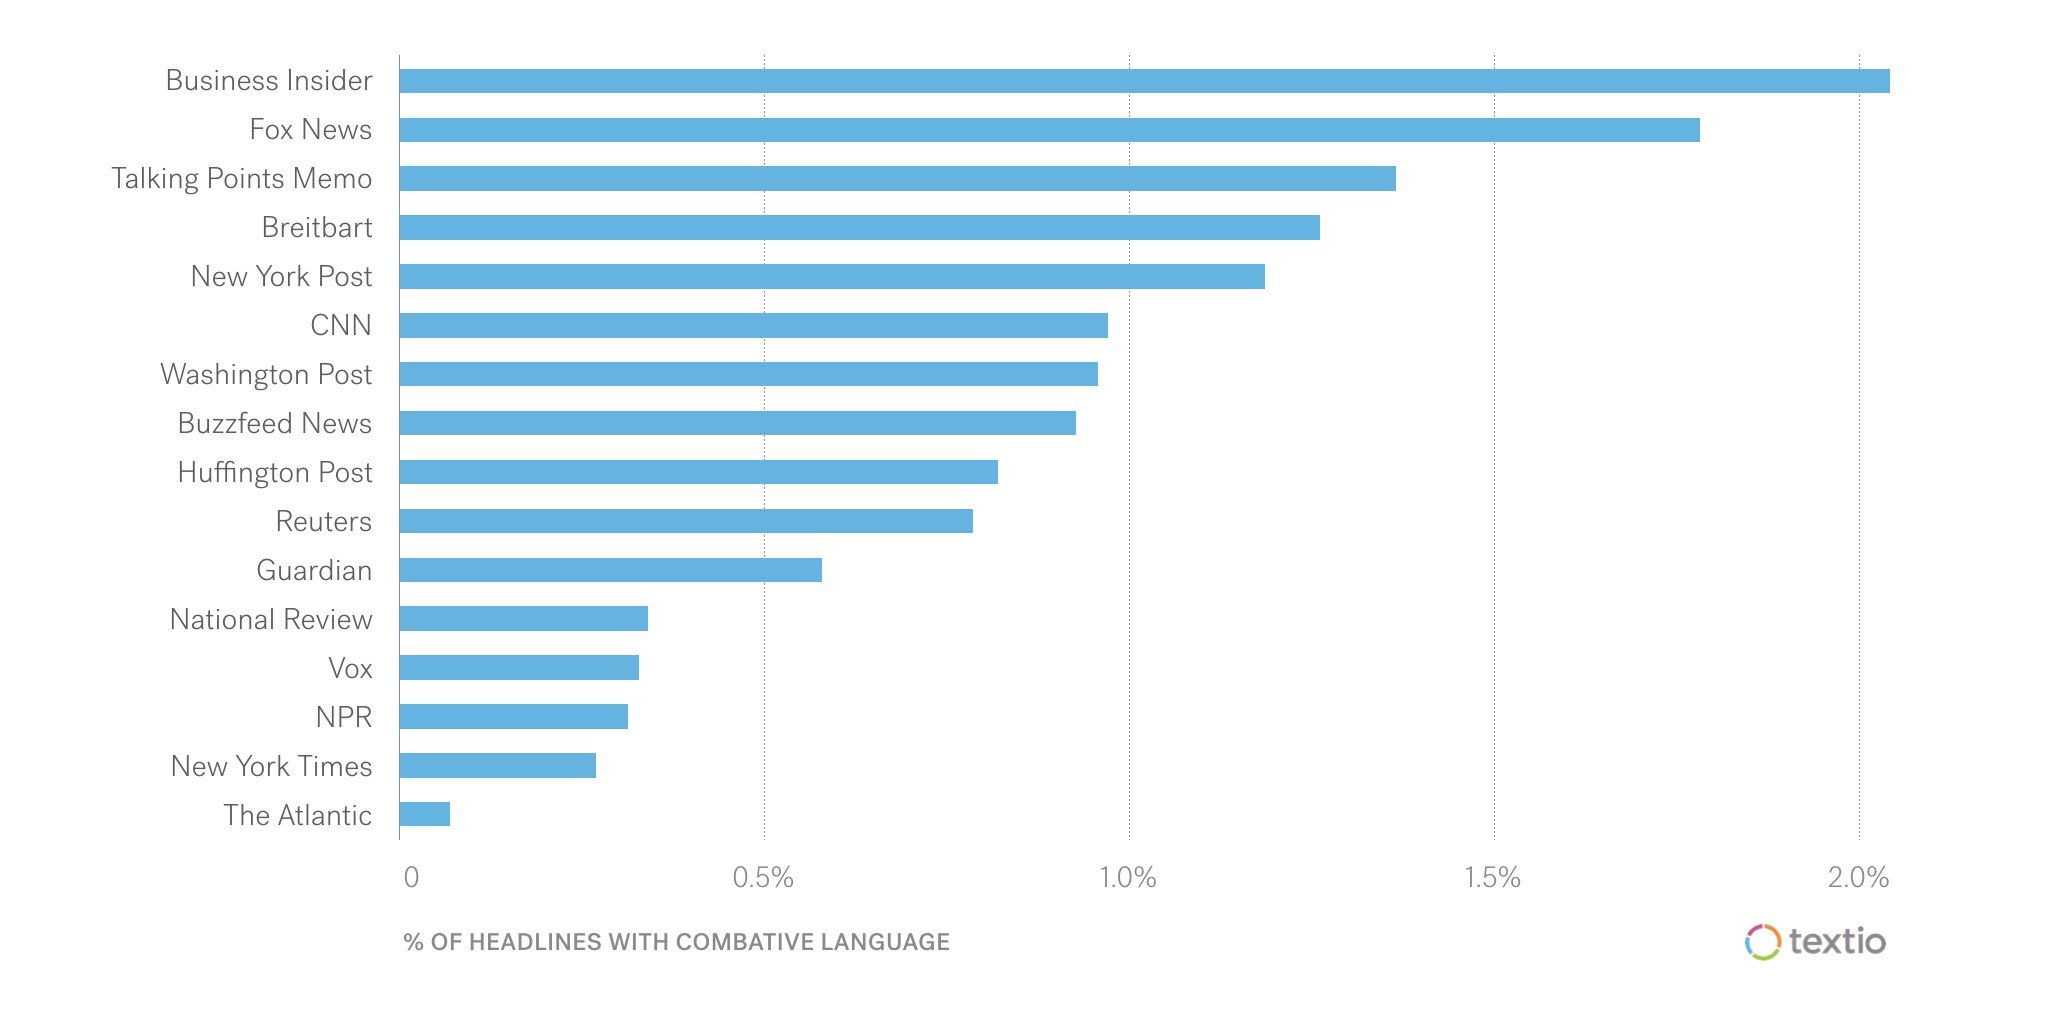 Bar chart of media outlets showing the % of headlines with combative language. From the most to the least usage are as follows: Business Insider, Fox News, Talking Points Memo, Breitbart, New York Post, CNN, Washington Post, Buzzfeed News, Huffington Post, Requters, Guardian, National Review, Vox, NPR, New York Times, The Atlantic